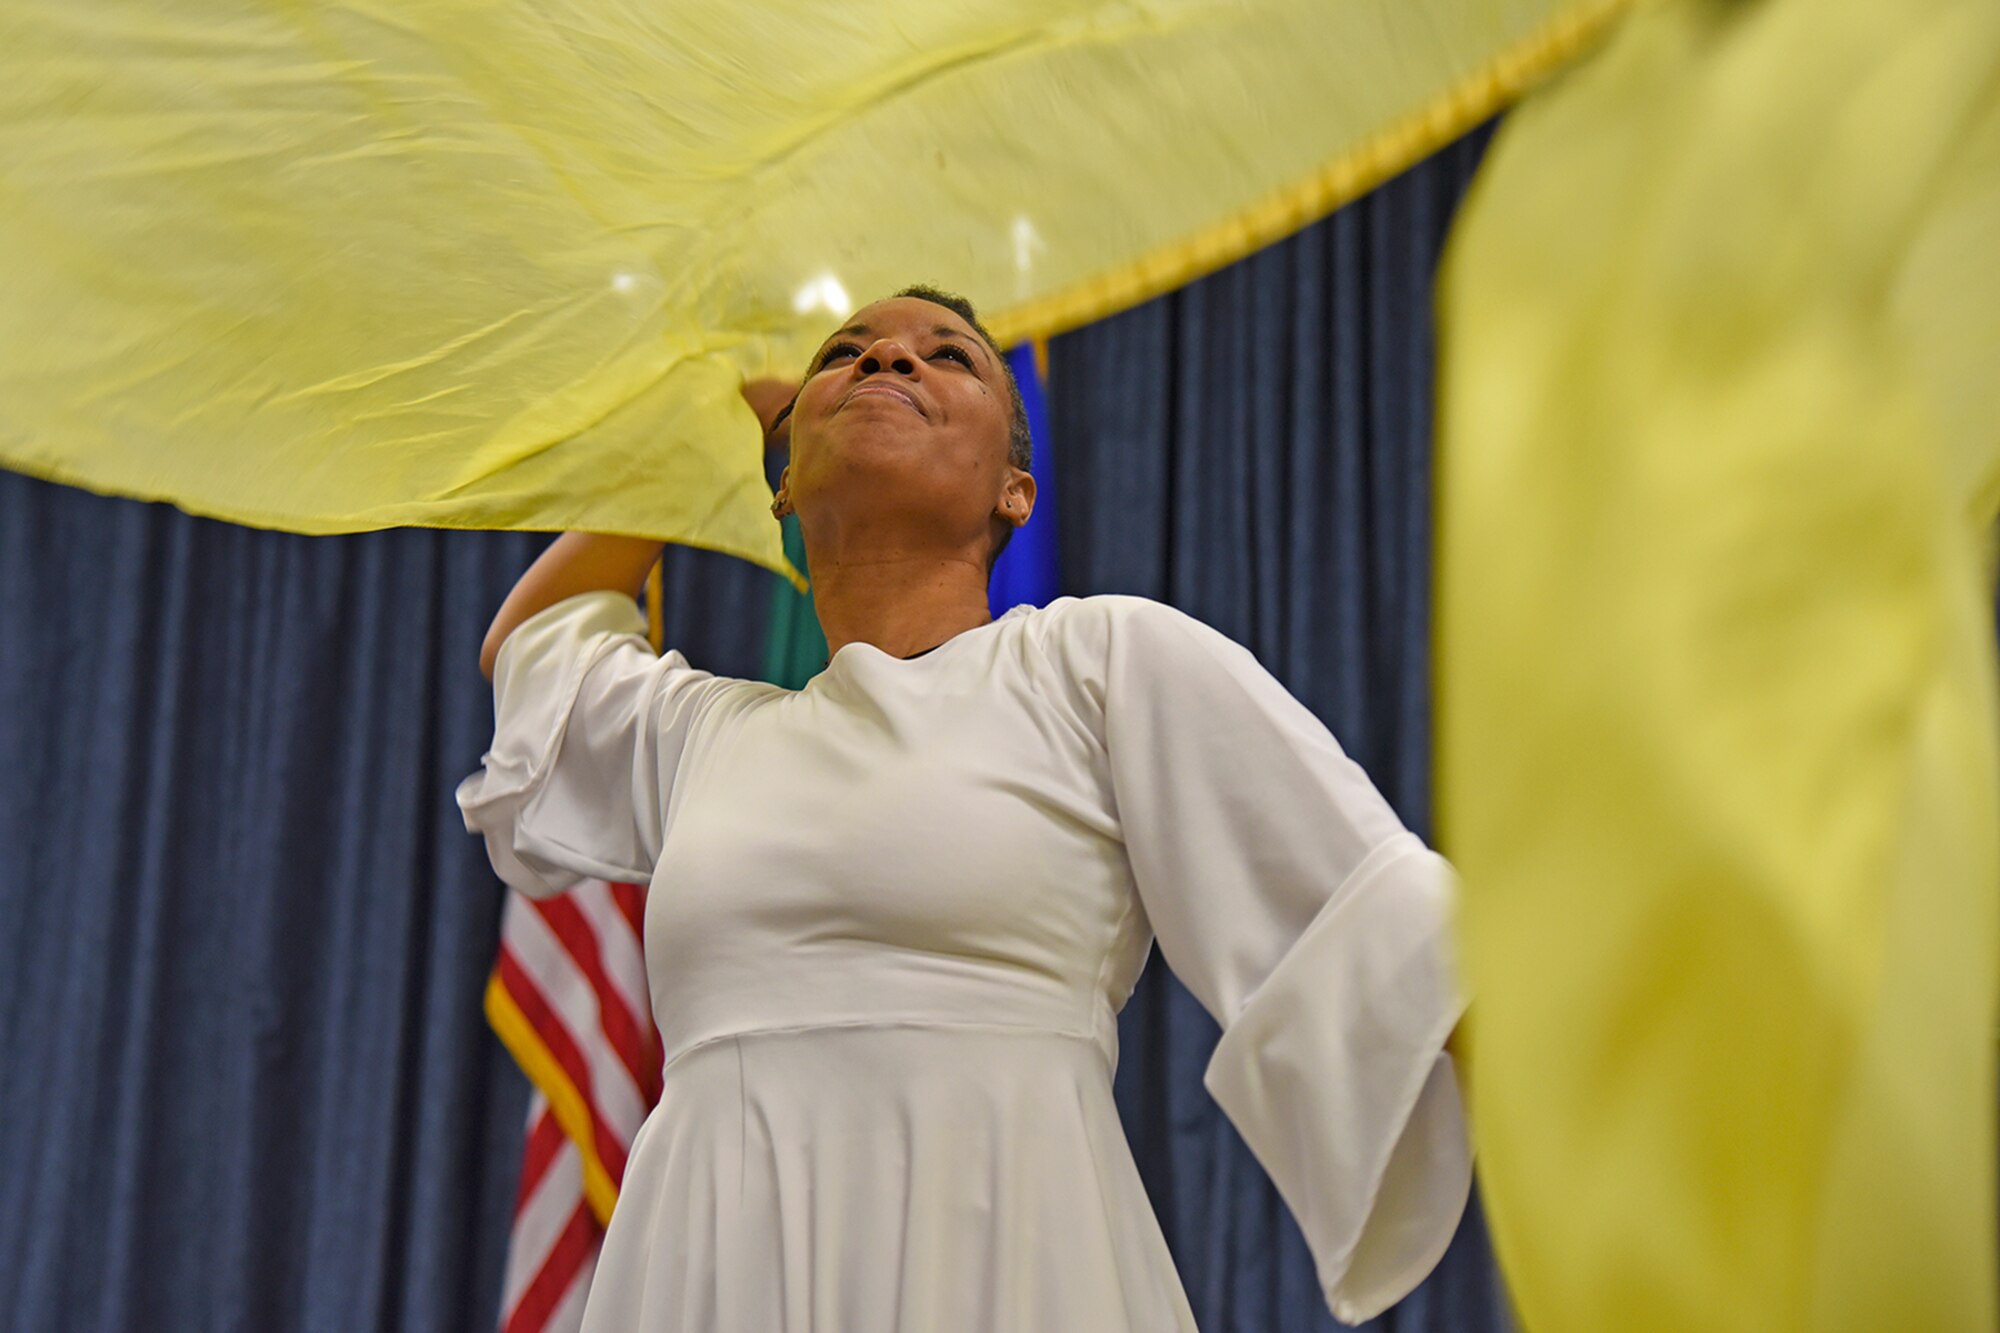 Mona Martin performs a praise dance during the National Black History Month luncheon Feb. 23, 2017, at Fairchild Air Force Base, Washington. Praise dance or liturgical dance is a type of dance incorporated into liturgies and worship services as an expression of worship to enhance the prayer or worship experience. (U.S. Air Force photo/Senior Airman Mackenzie Richardson)